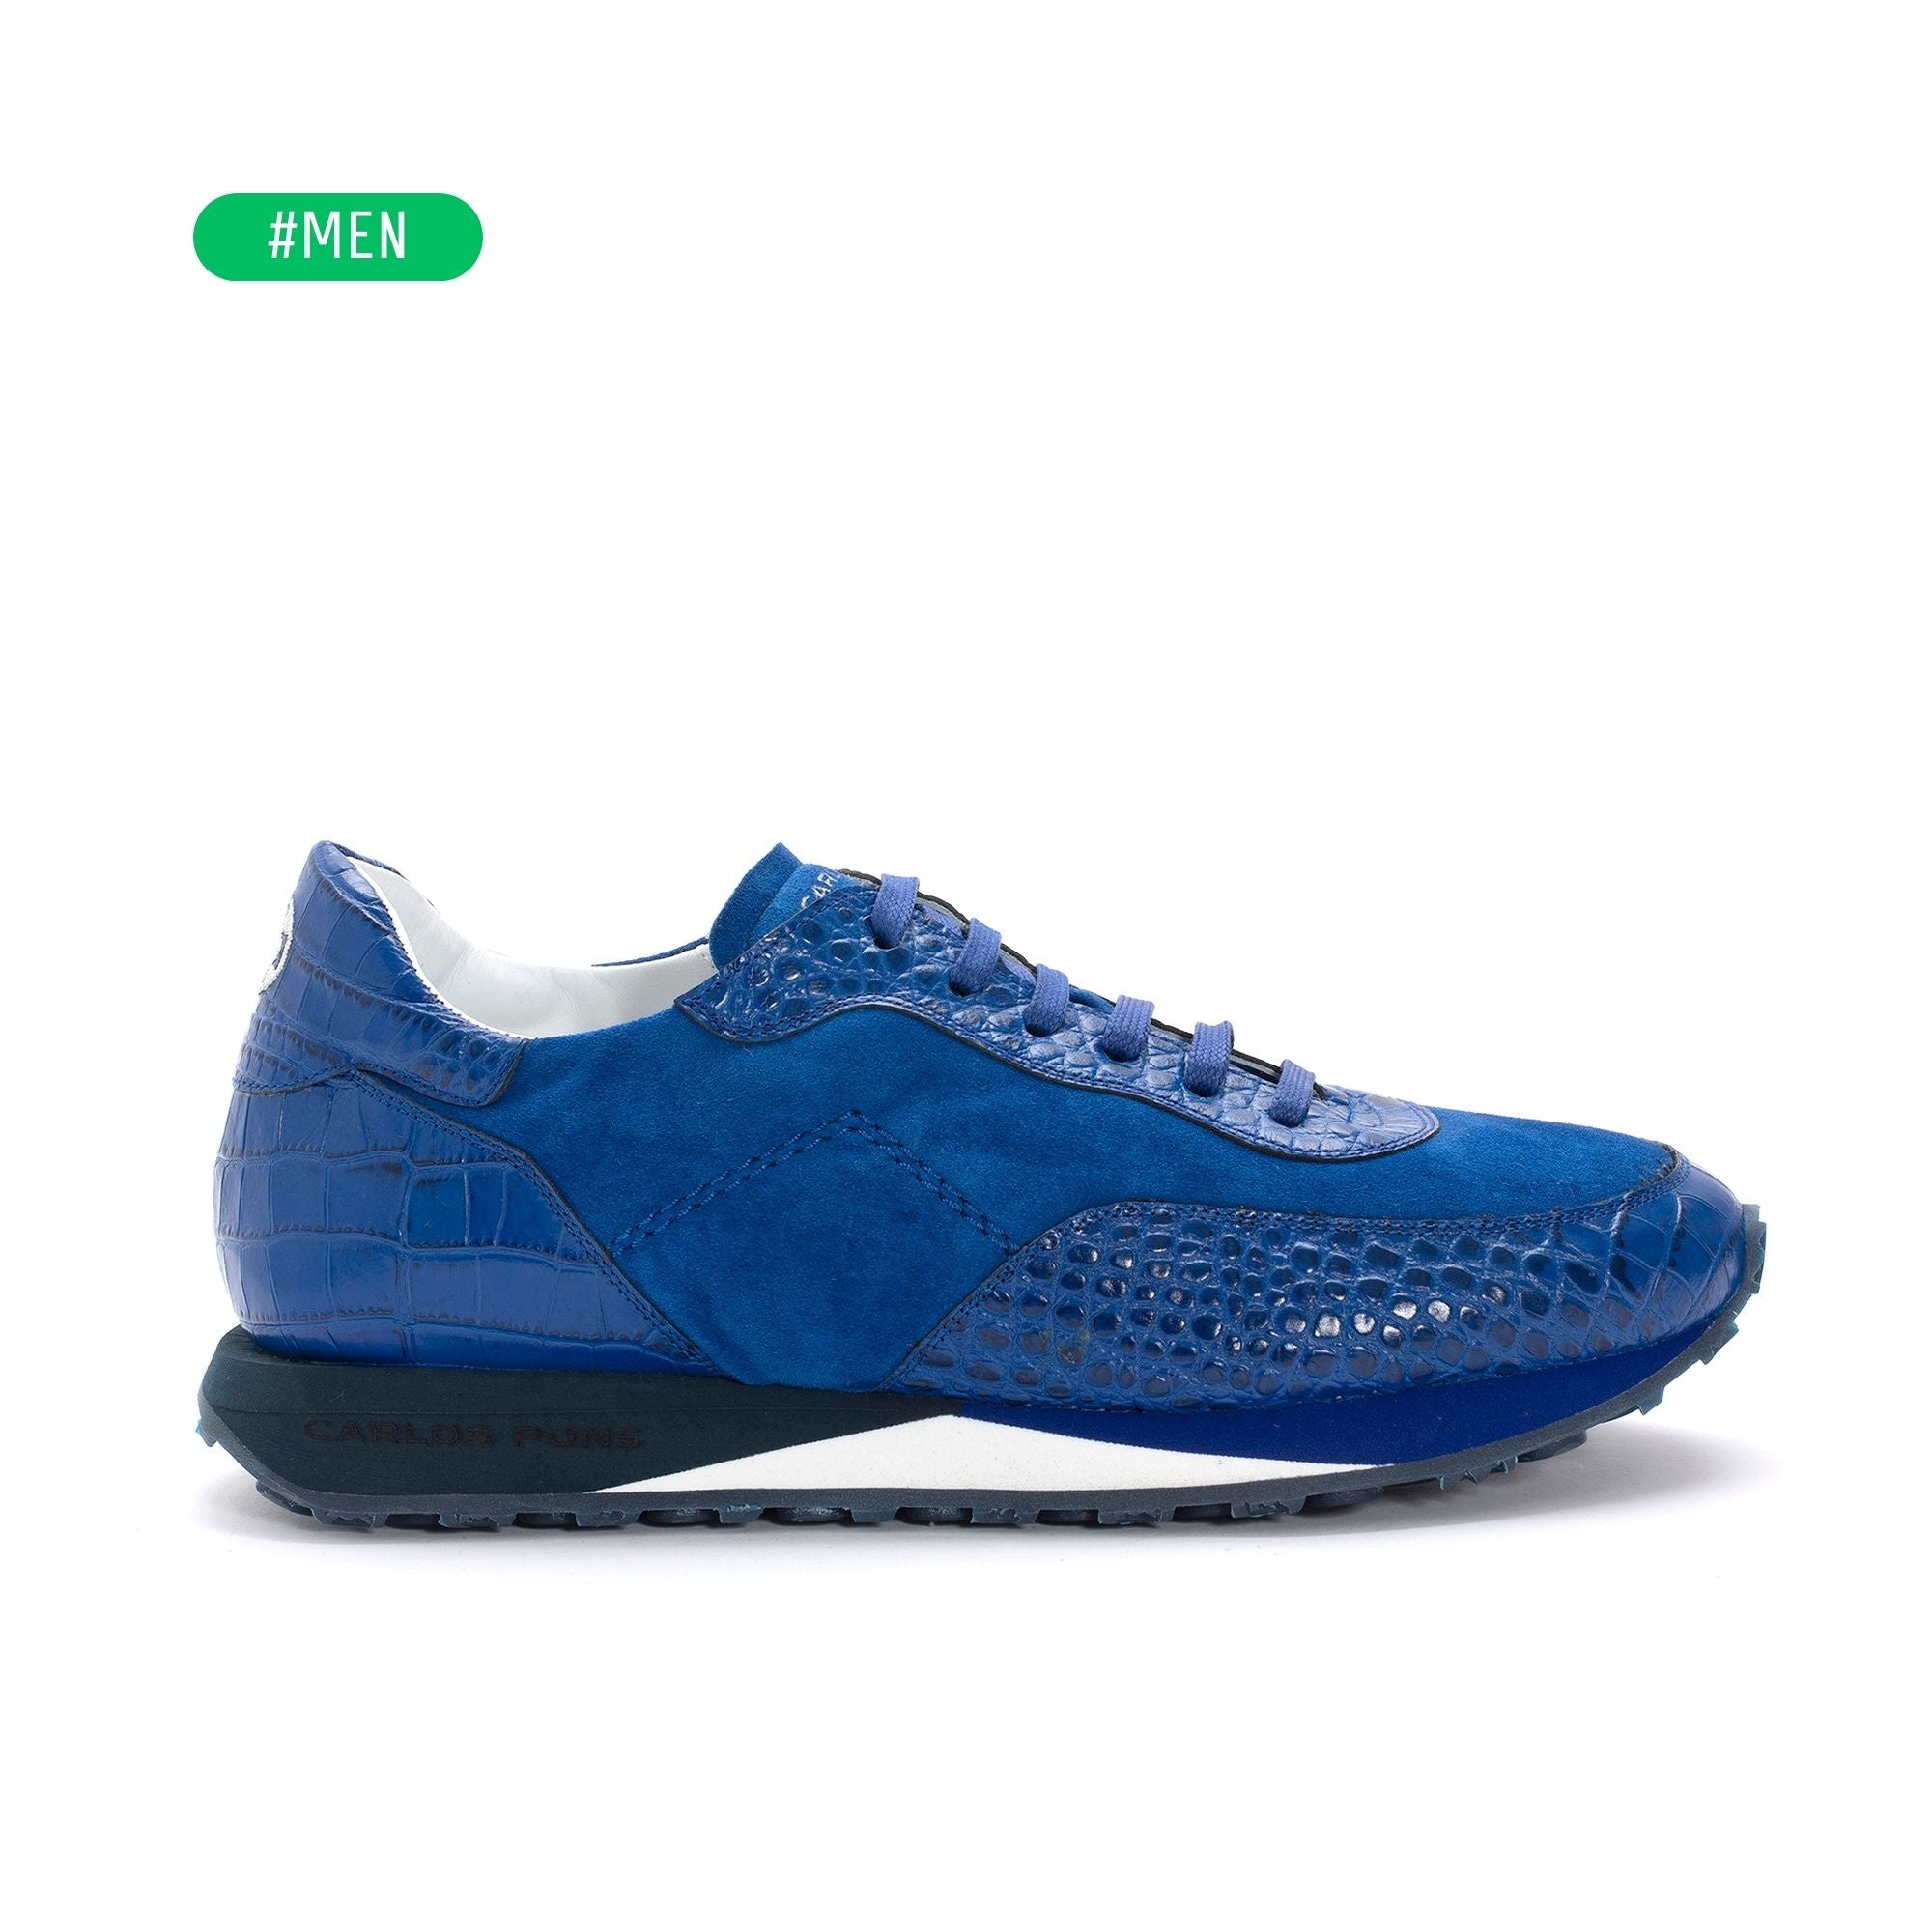 SNEAKER RUNNER COCCO ELECTRIC